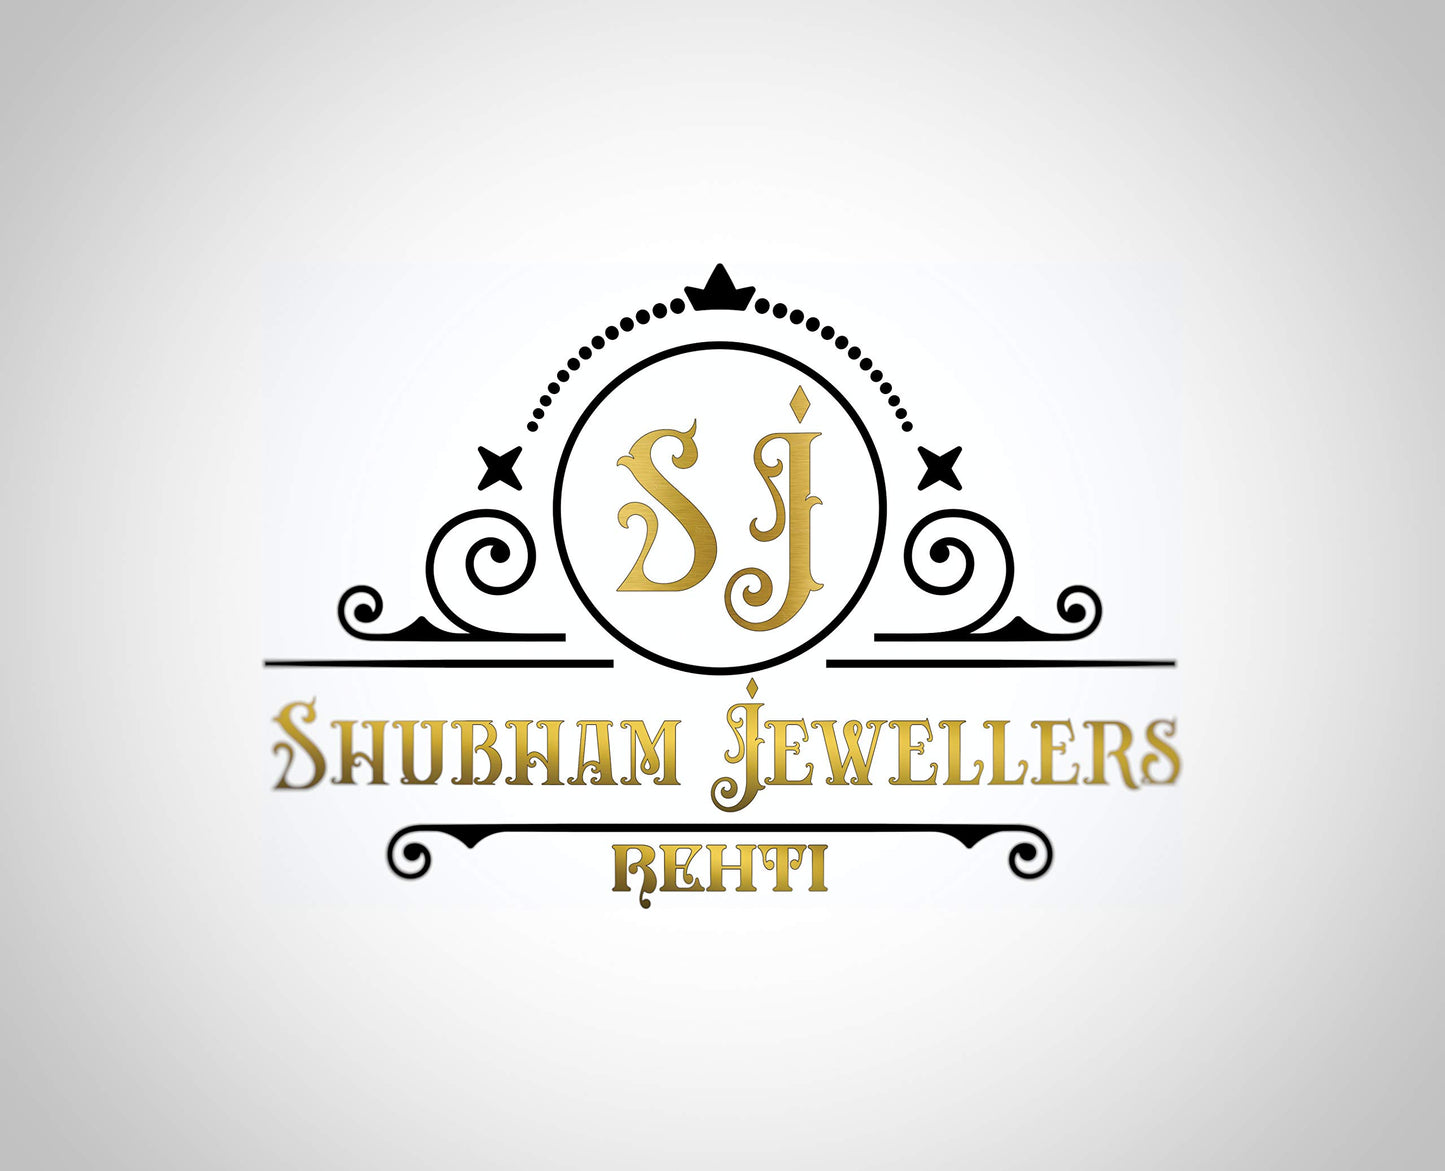 SJ SHUBHAM JEWELLERS Rehti 925 Sterling Silver Mangalsutra with Pearl & Black Beeds Crystal Chain for Women - Party Casual Wear - JewelYaari By Shubham Jewellers